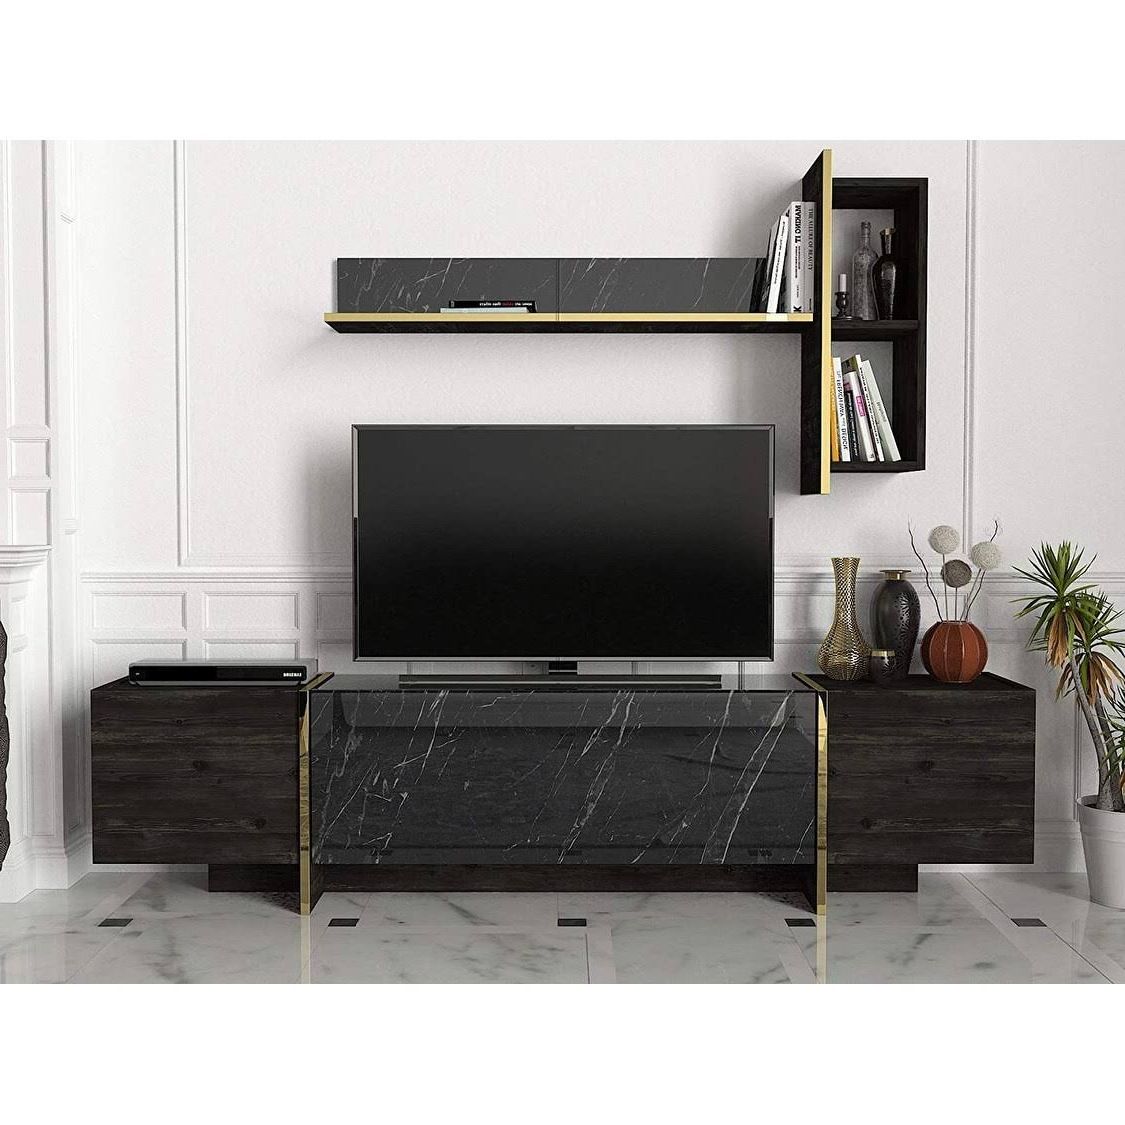 Most Recent Black Marble Tv Stands Throughout Sayre Furniture Veyron Tv Unit Black Rebab Black Marble – Wgl 1 S (View 3 of 15)